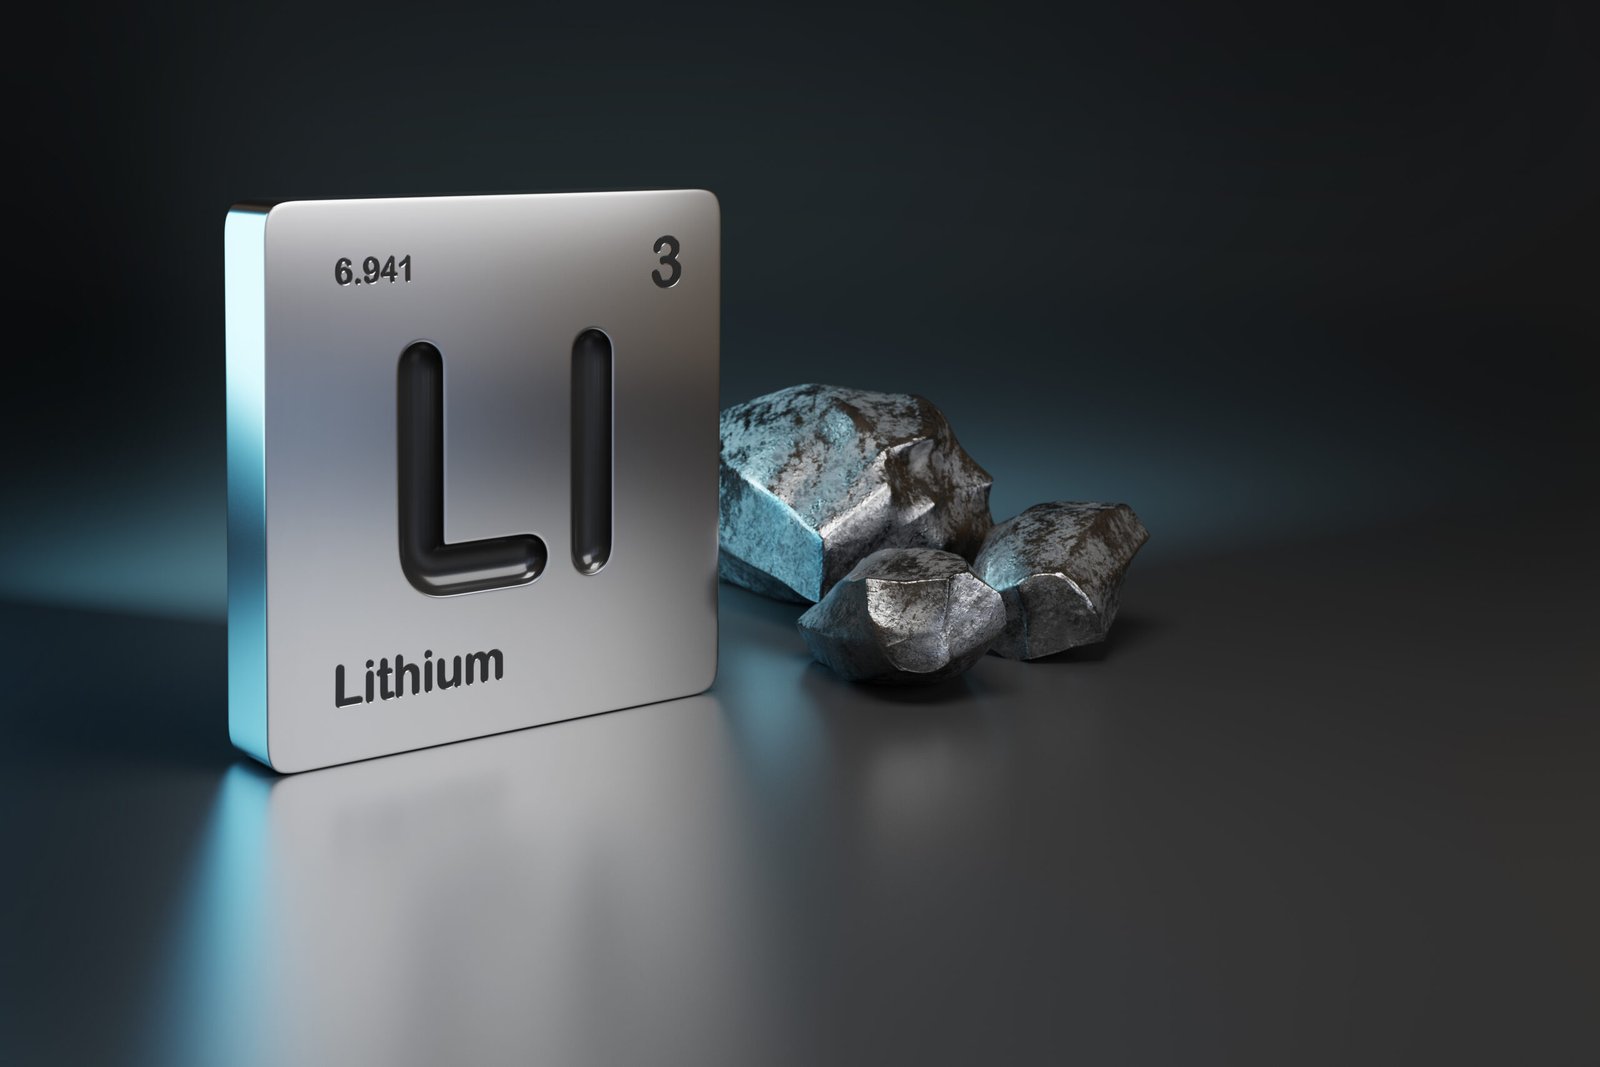 Why are The Lithium stocks Setting New Price Records?